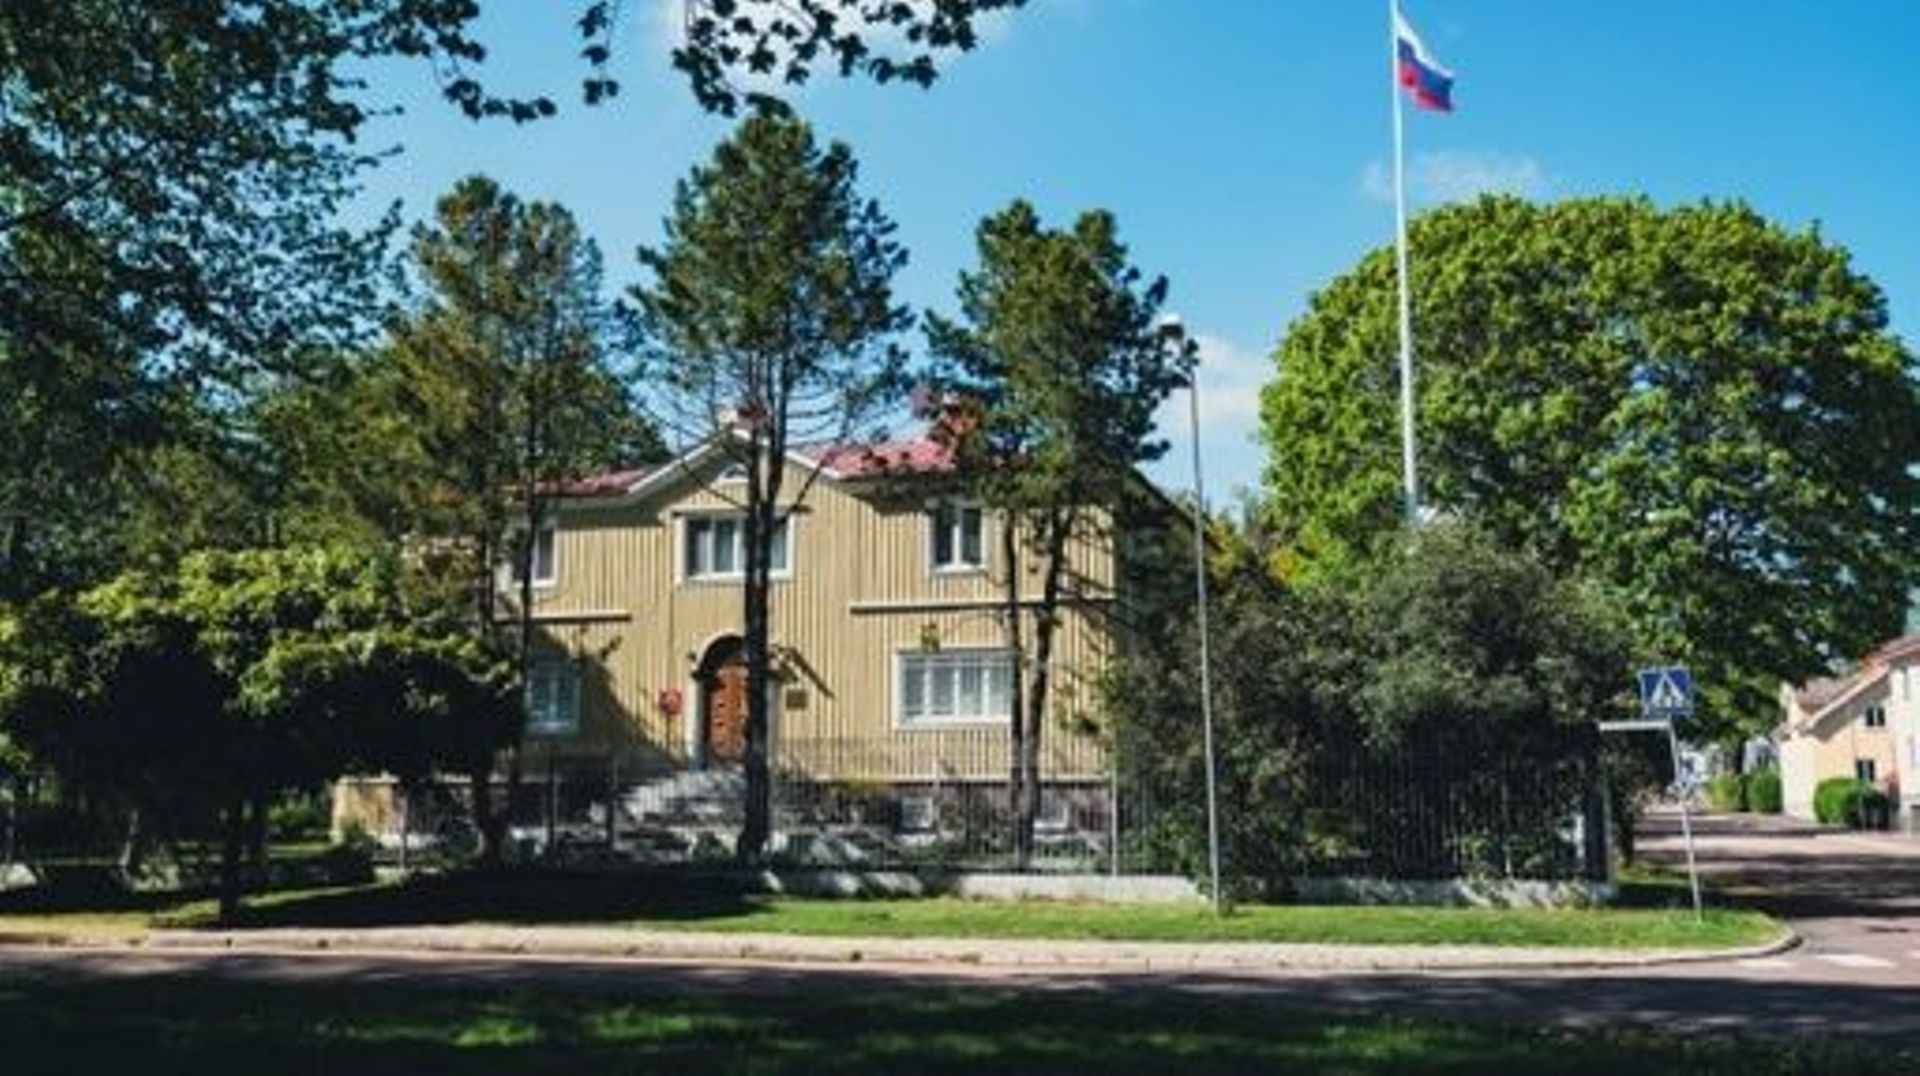 The Russian Embassy is pictured in Mariehamn, Aland, Finland on June 1, 2022. Sprayed between Sweden and Finland like pebbles thrown from a shaker, Finland’s autonomous Aland Islands are a picturesque archipelago once part of Russia and whose demilitaris